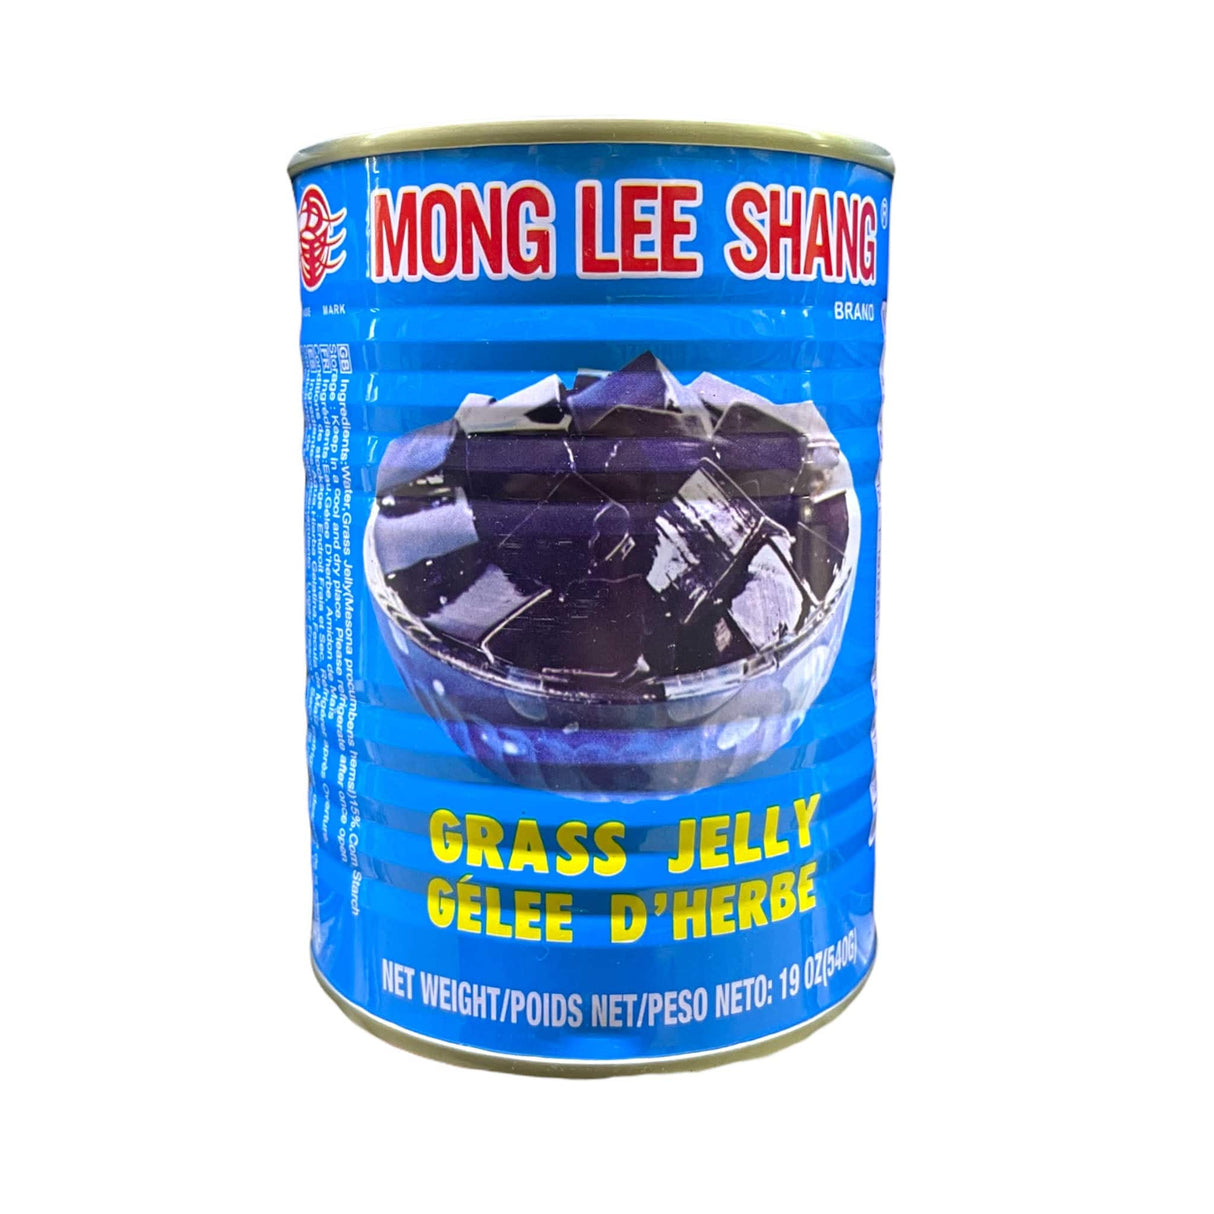 Mong Lee Shang Glass Jelly